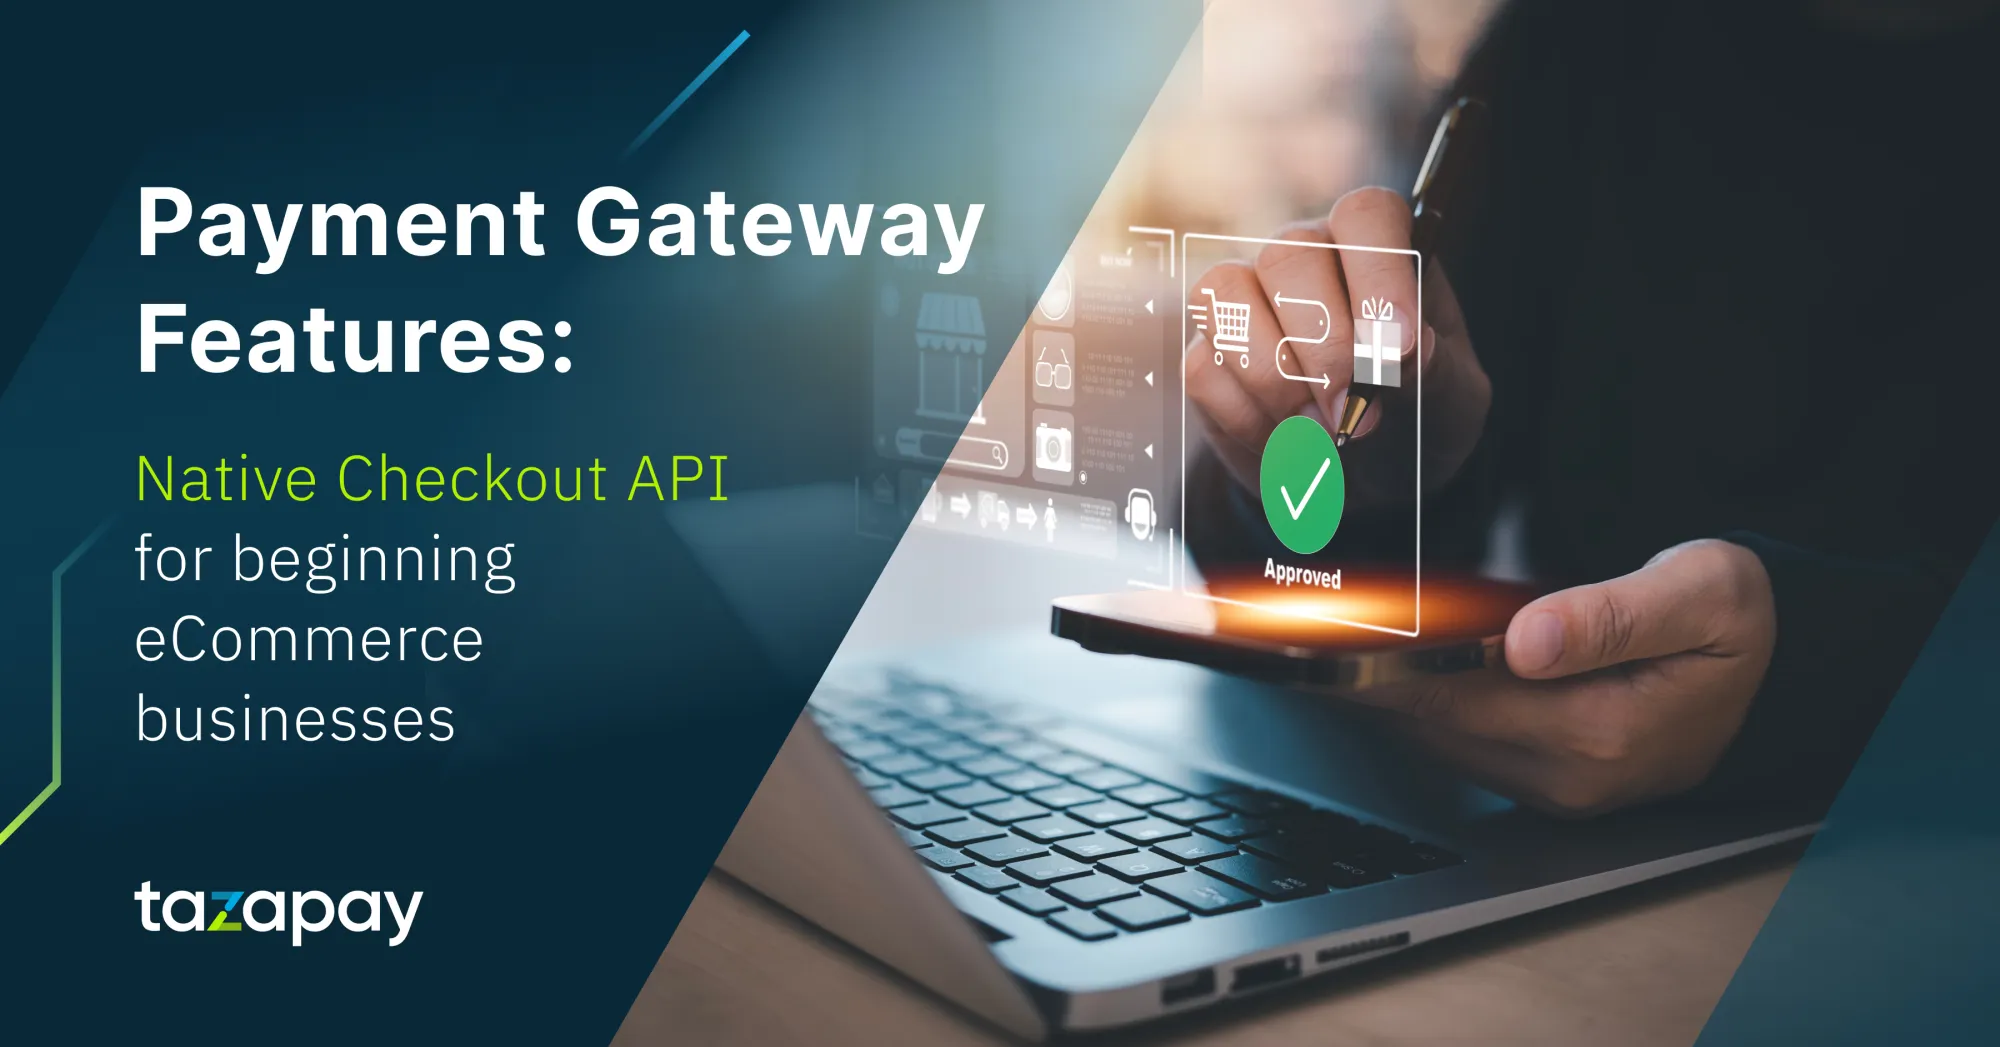 Payment Gateway Features: Native Checkout API for Beginning eCommerce Businesses